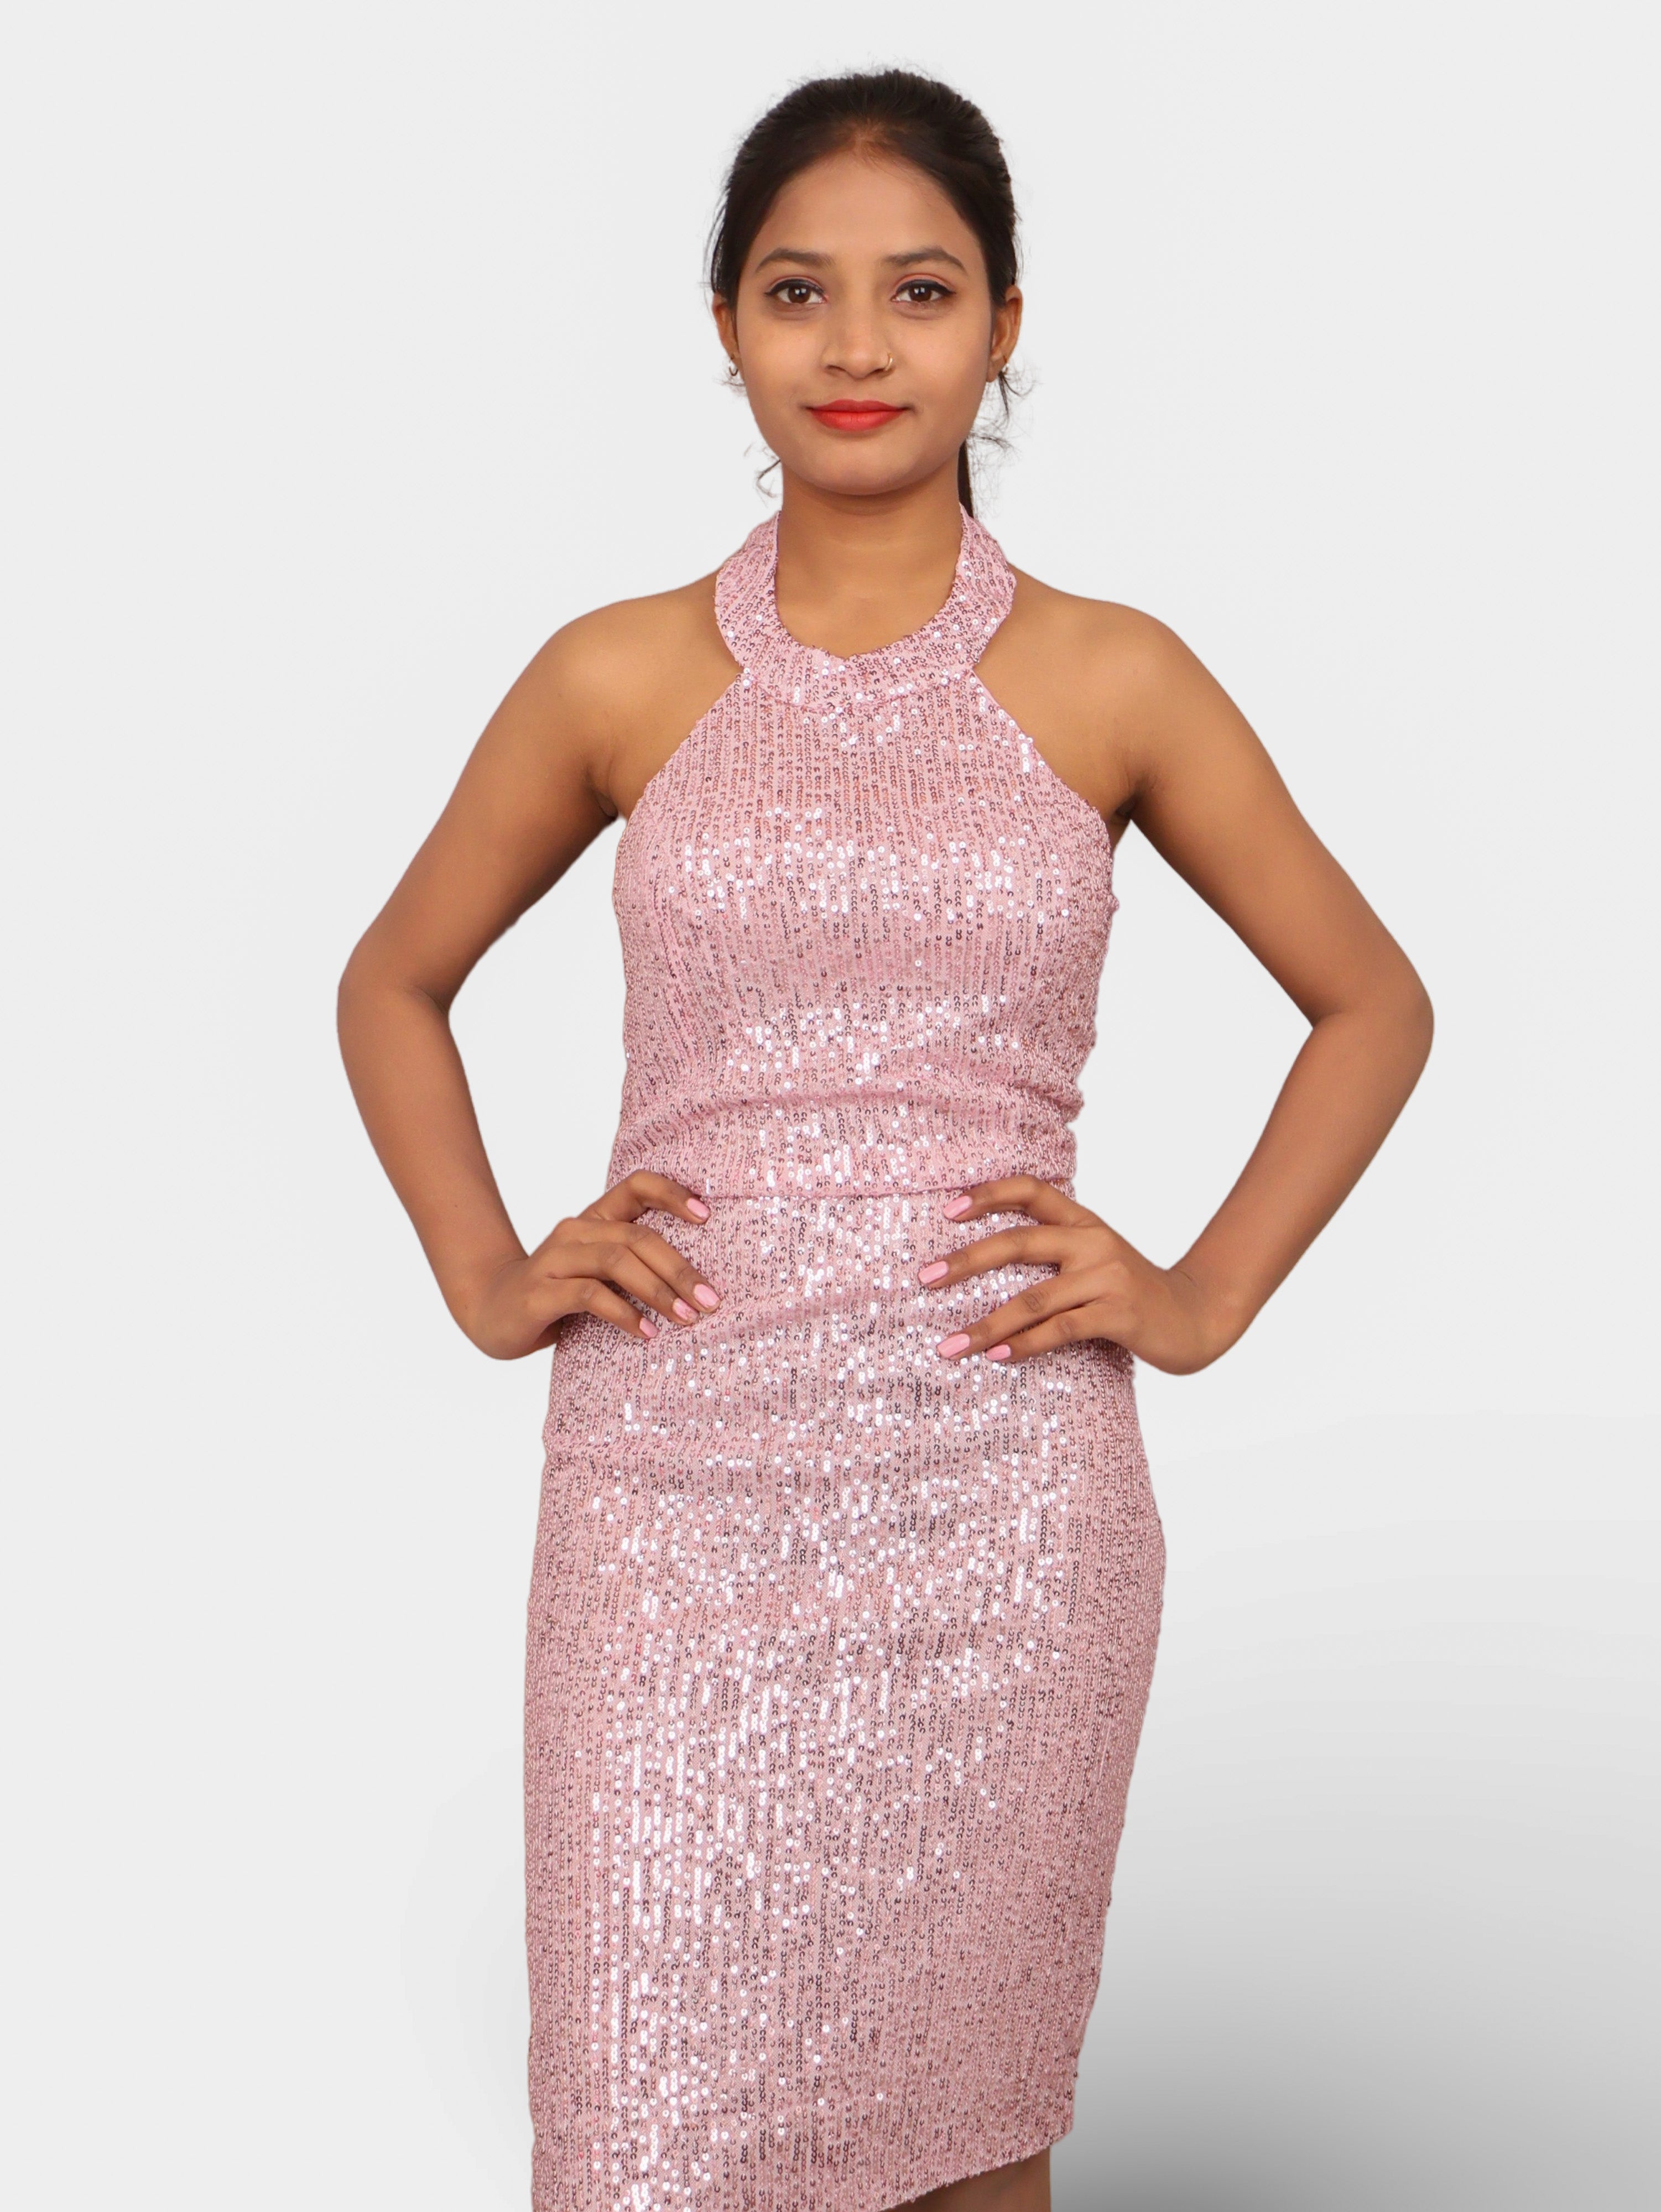 Sparkling Elegance: Halter Neck Pink Sequins Mini Party Dress by Shreekama Light Pink Dress for Party Festival Wedding Occasion in Noida